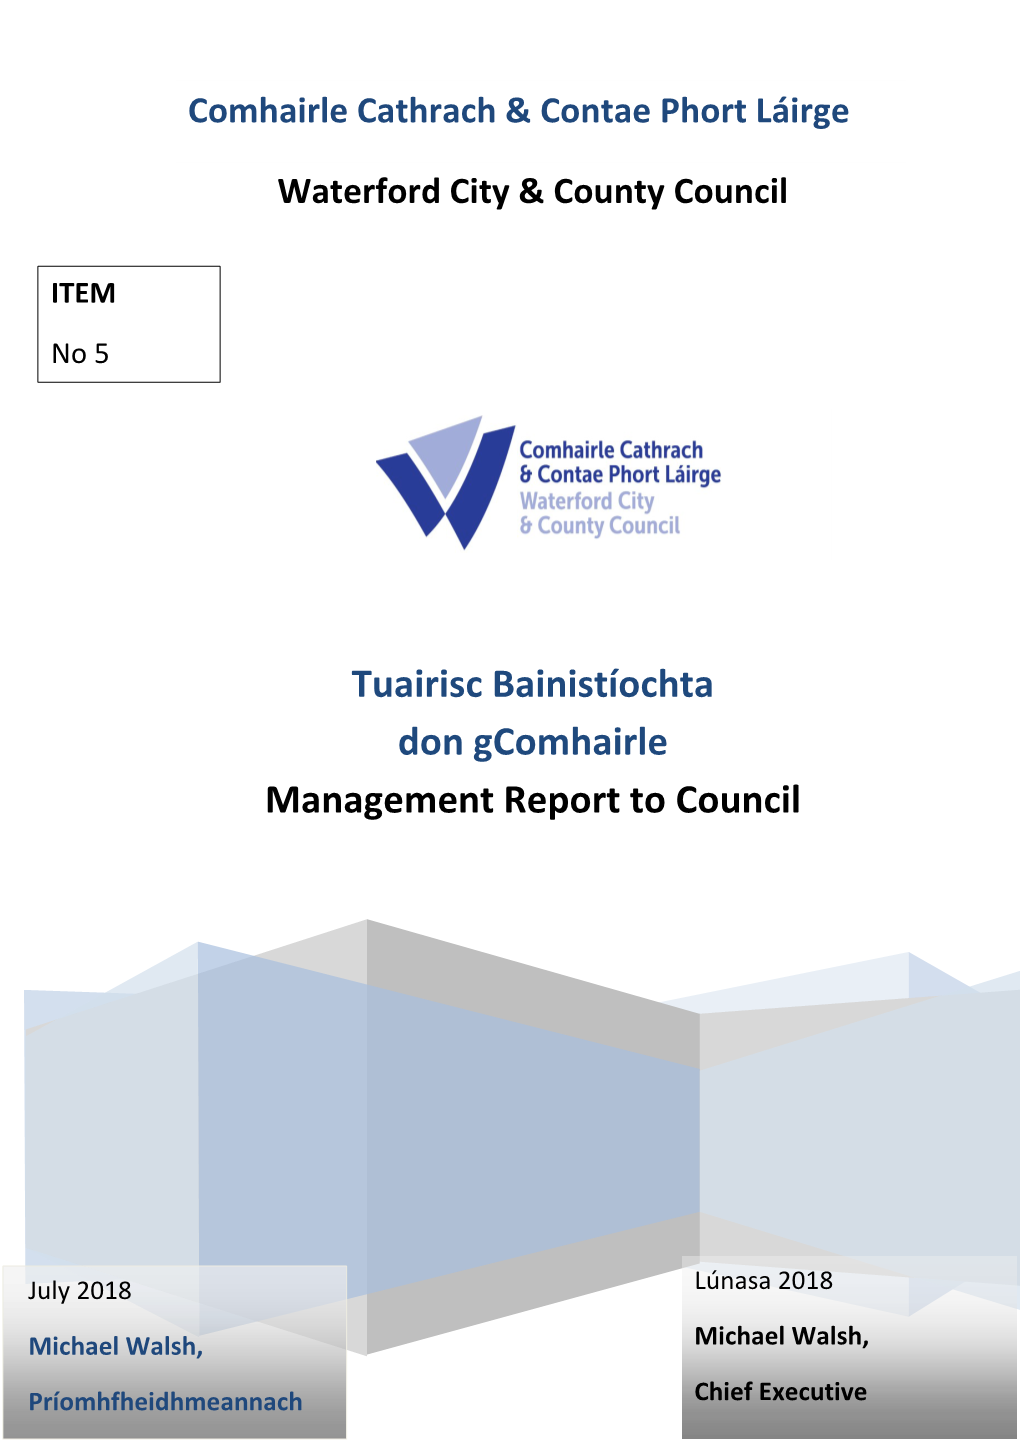 Management Report to Council